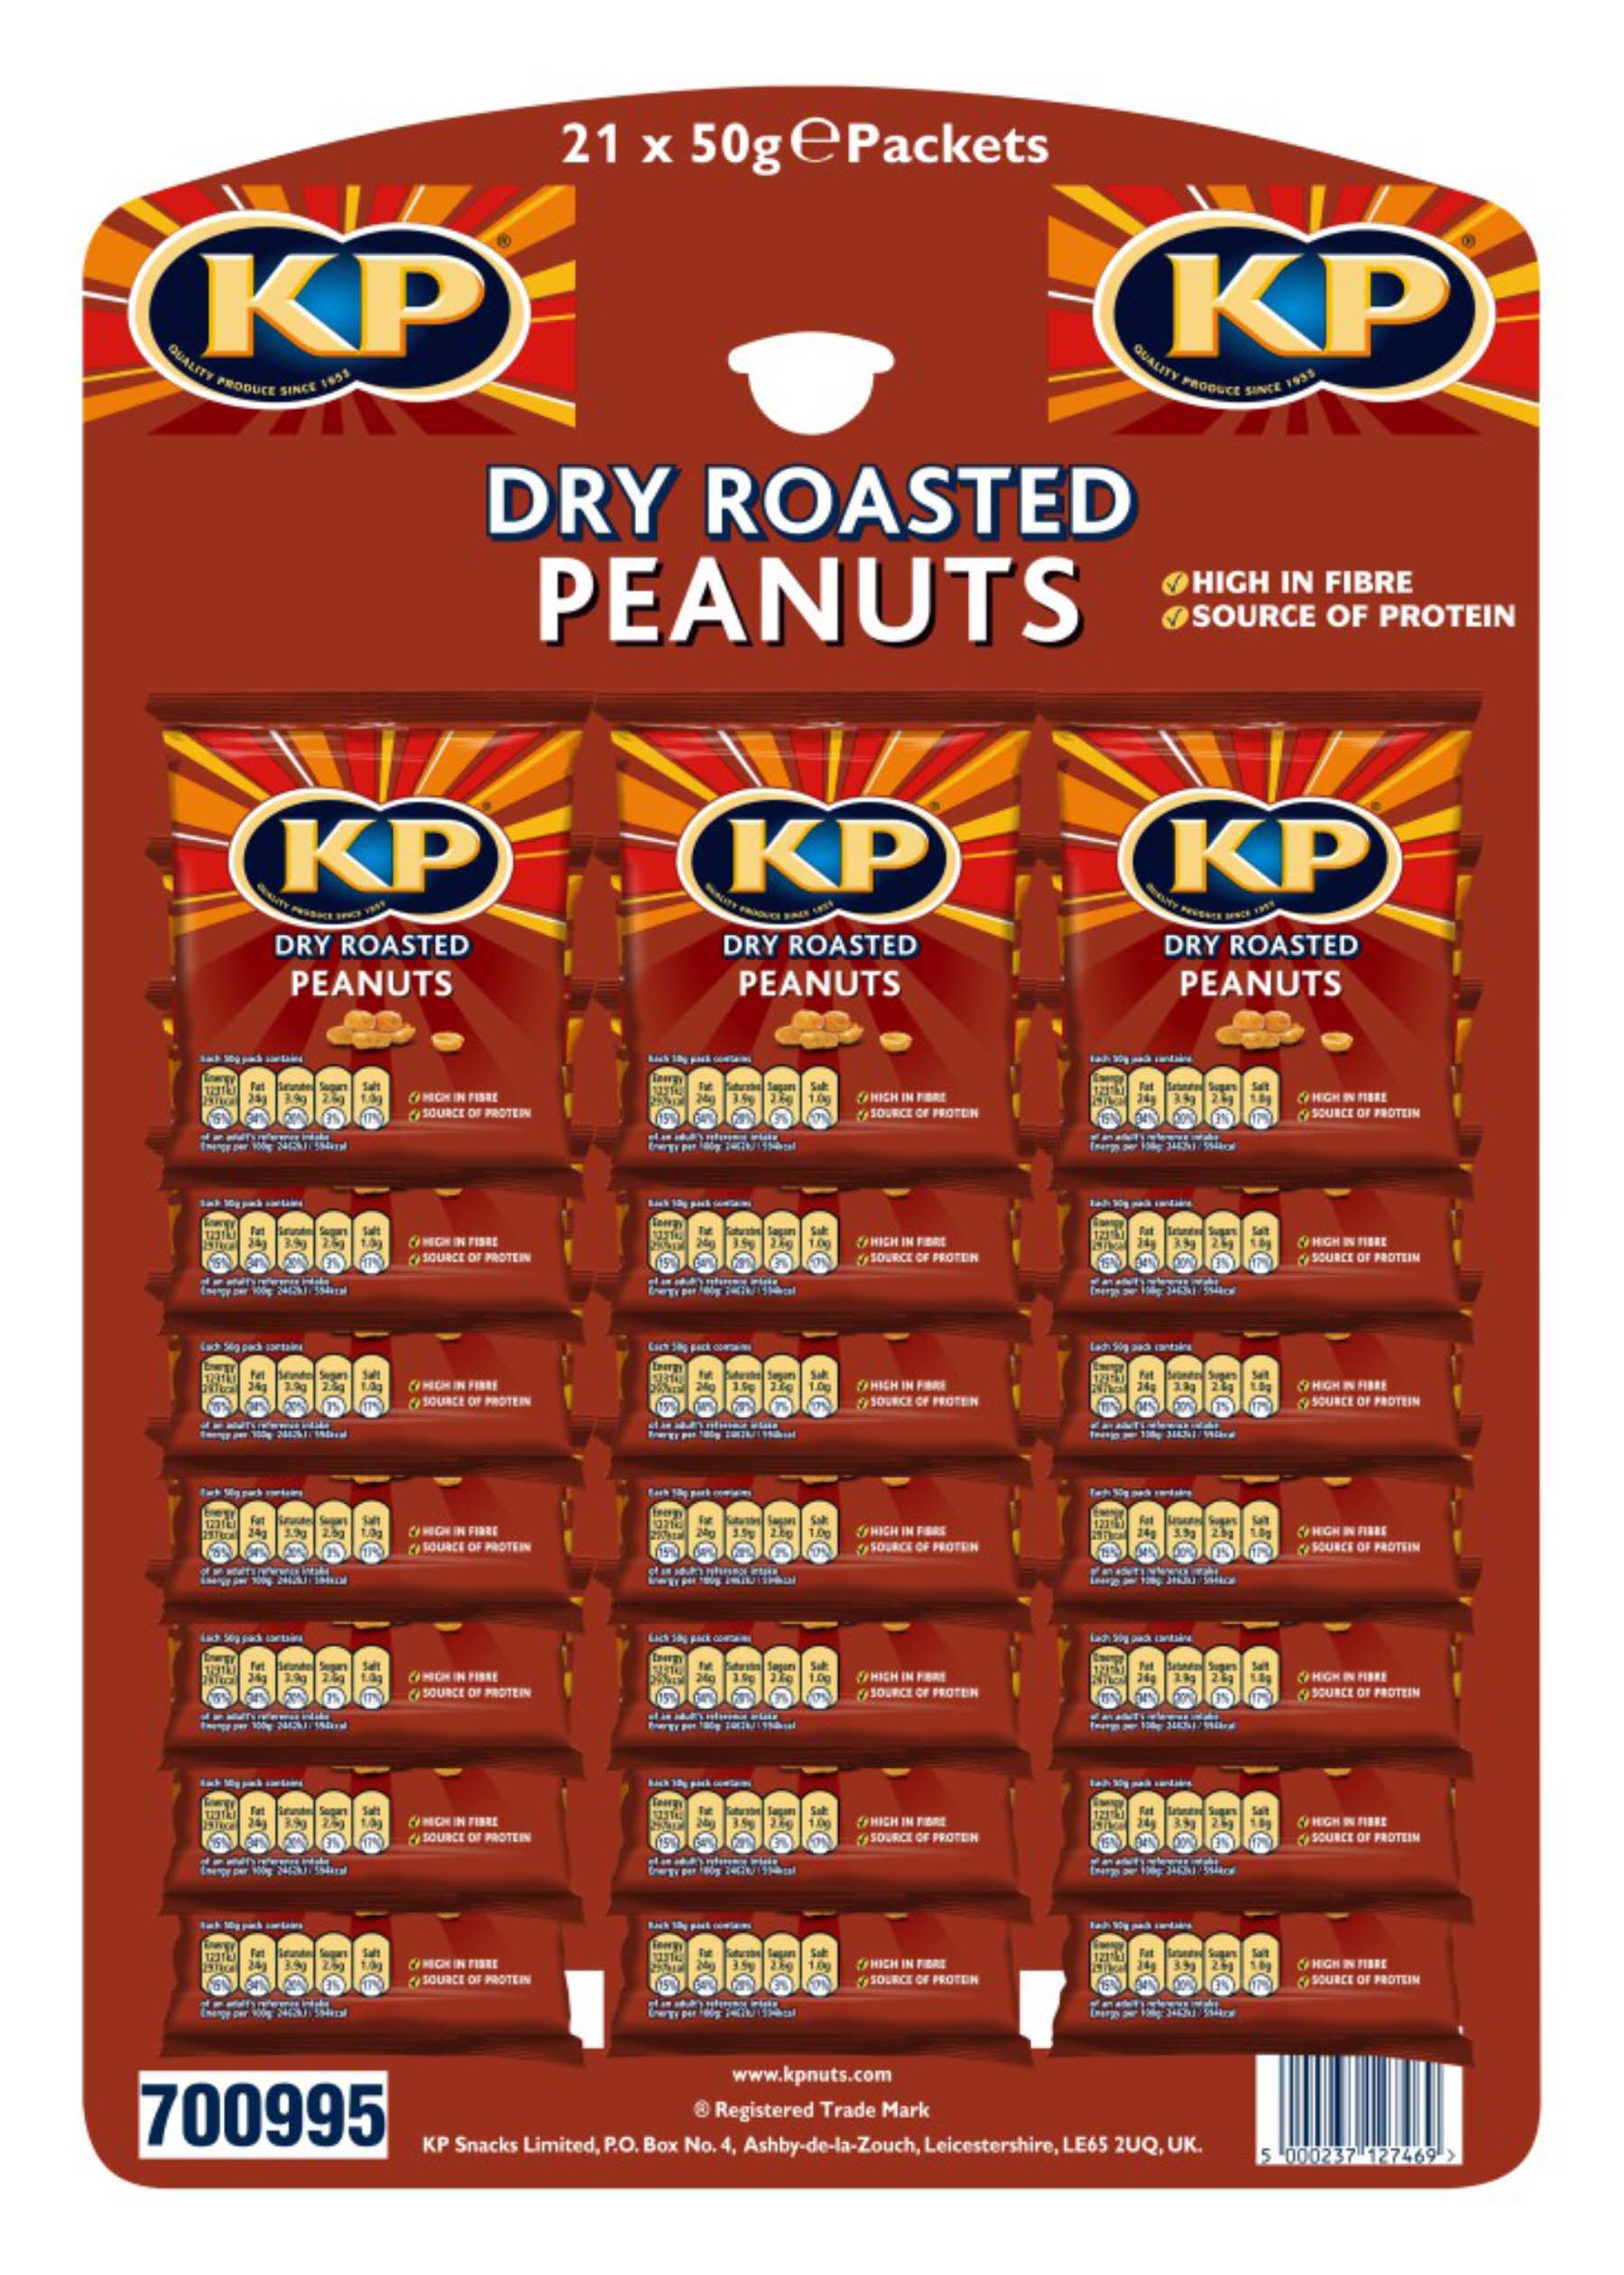 KP NUTS DRY ROASTED CARDS 21 x 50G